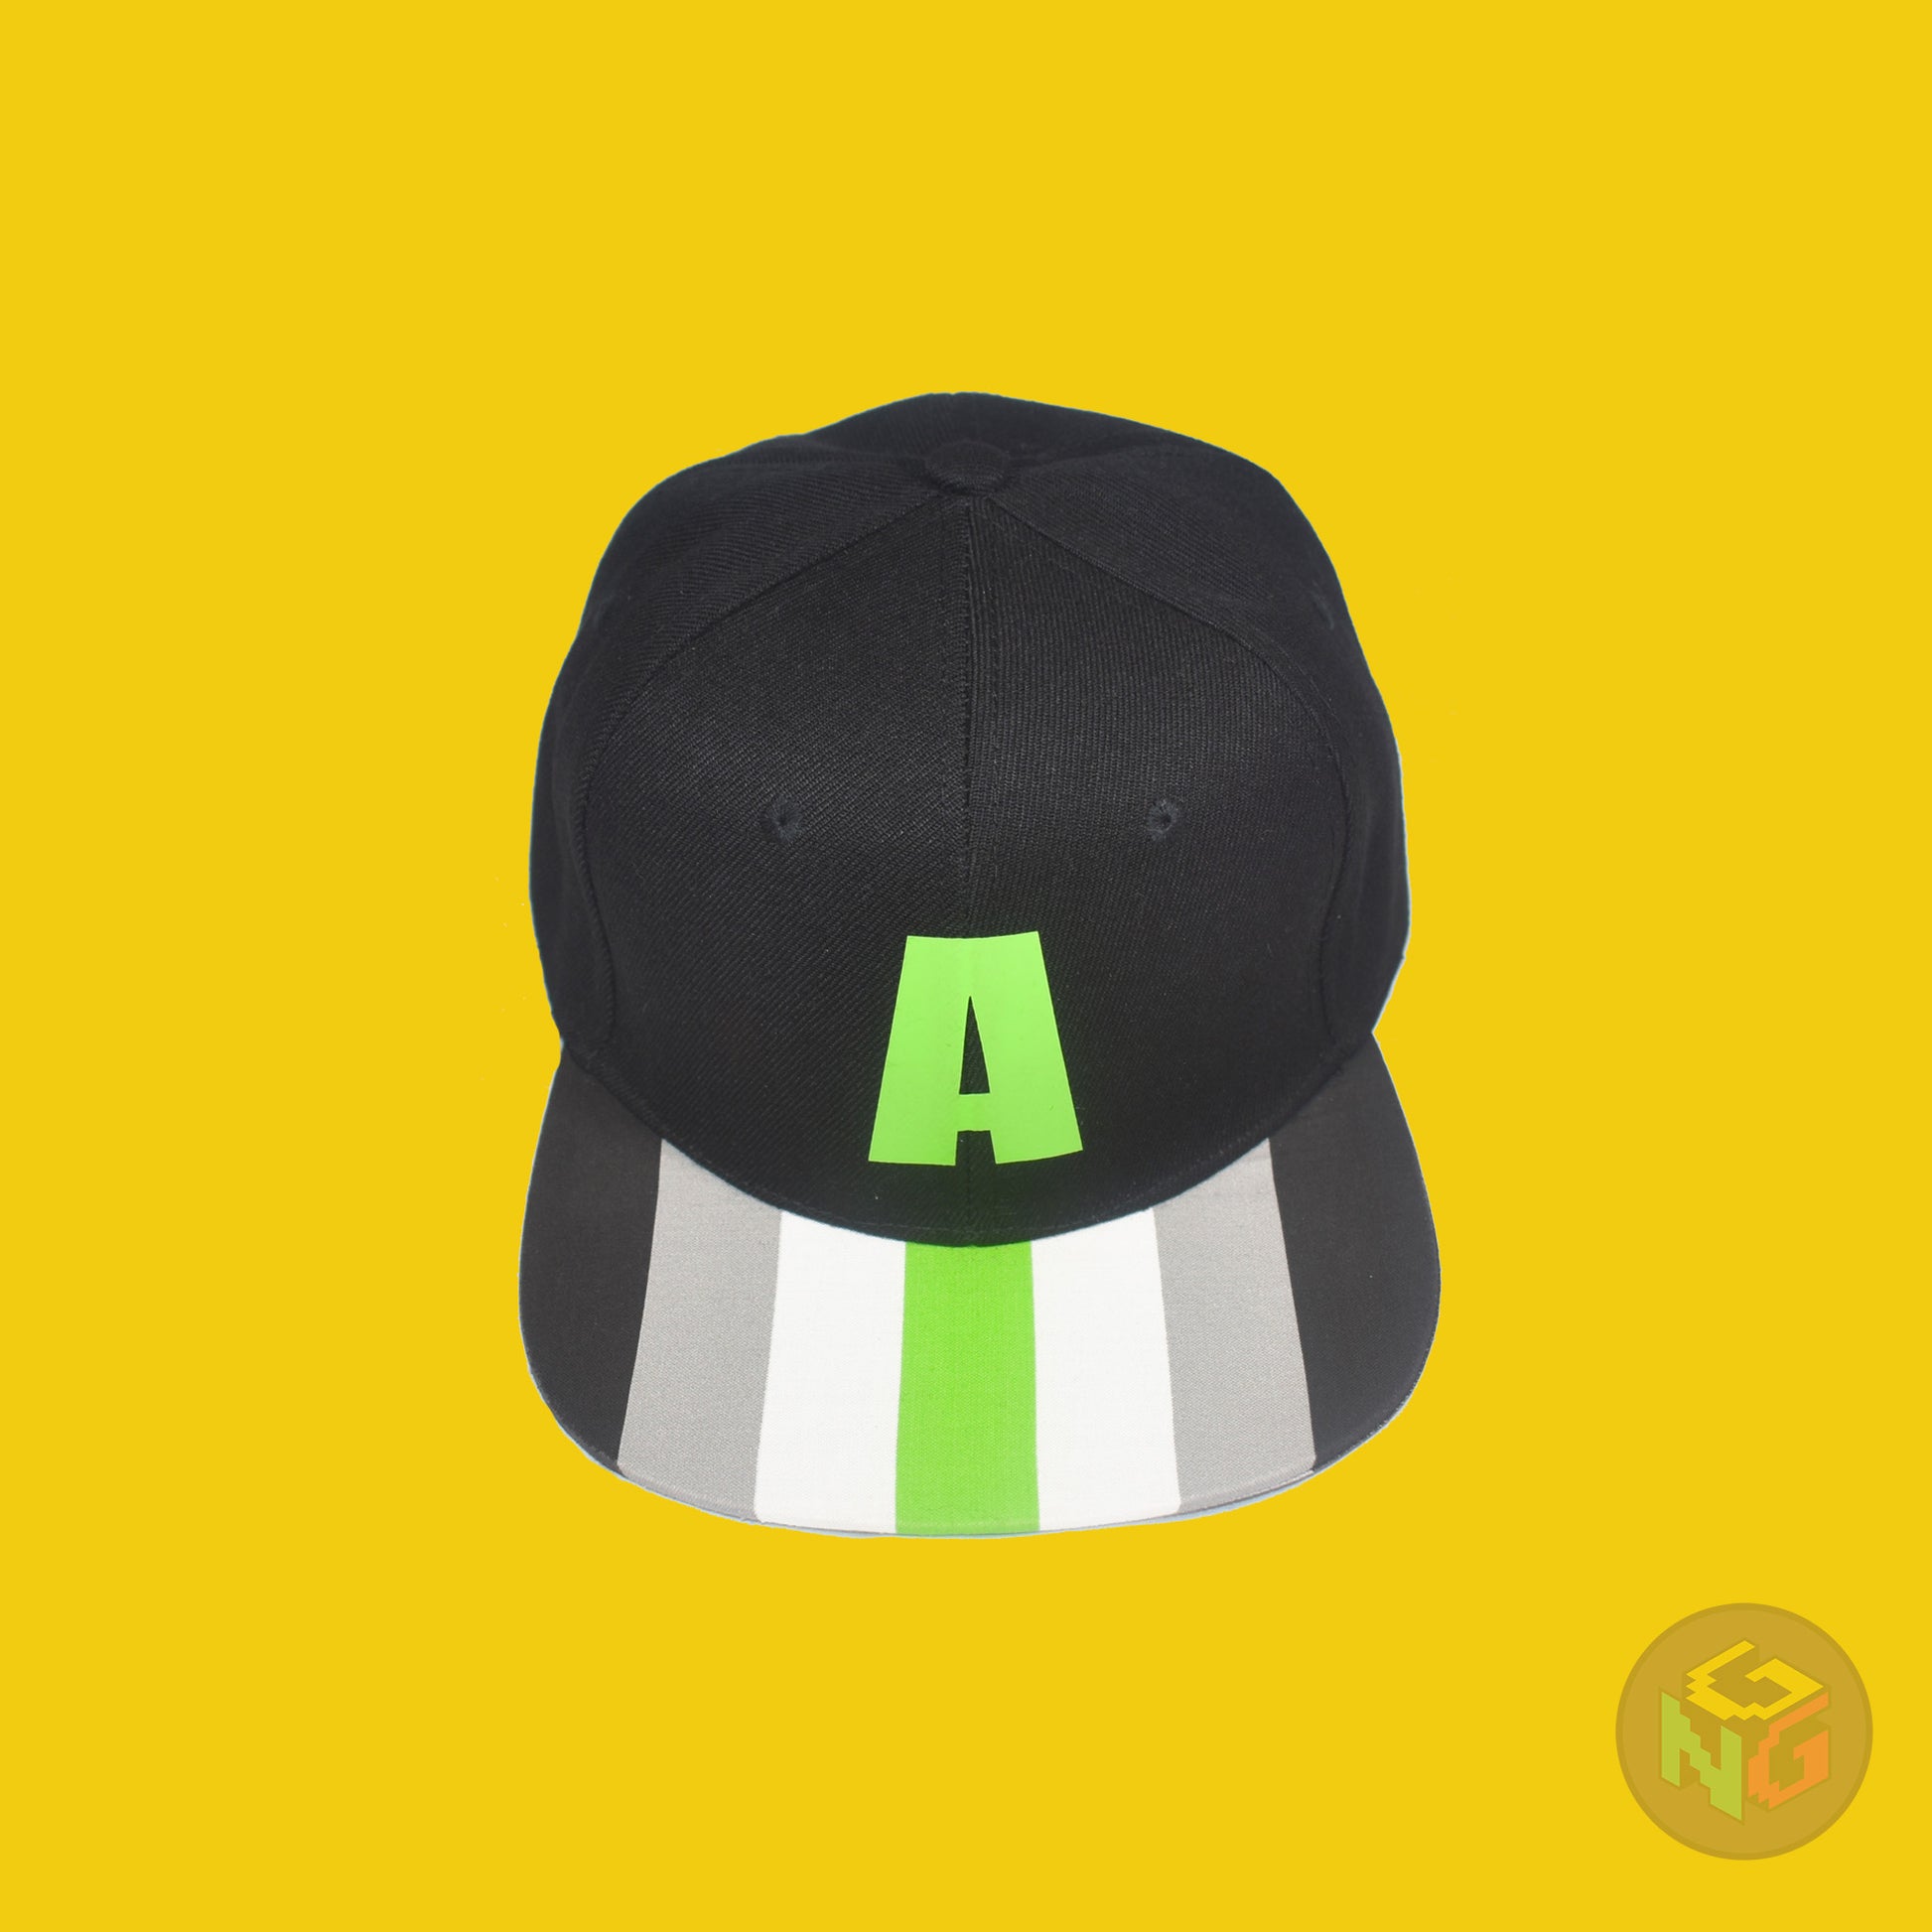 Black flat bill snapback hat. The brim has the agender pride flag on both sides and the front of the hat has a green letter “A”. Top view